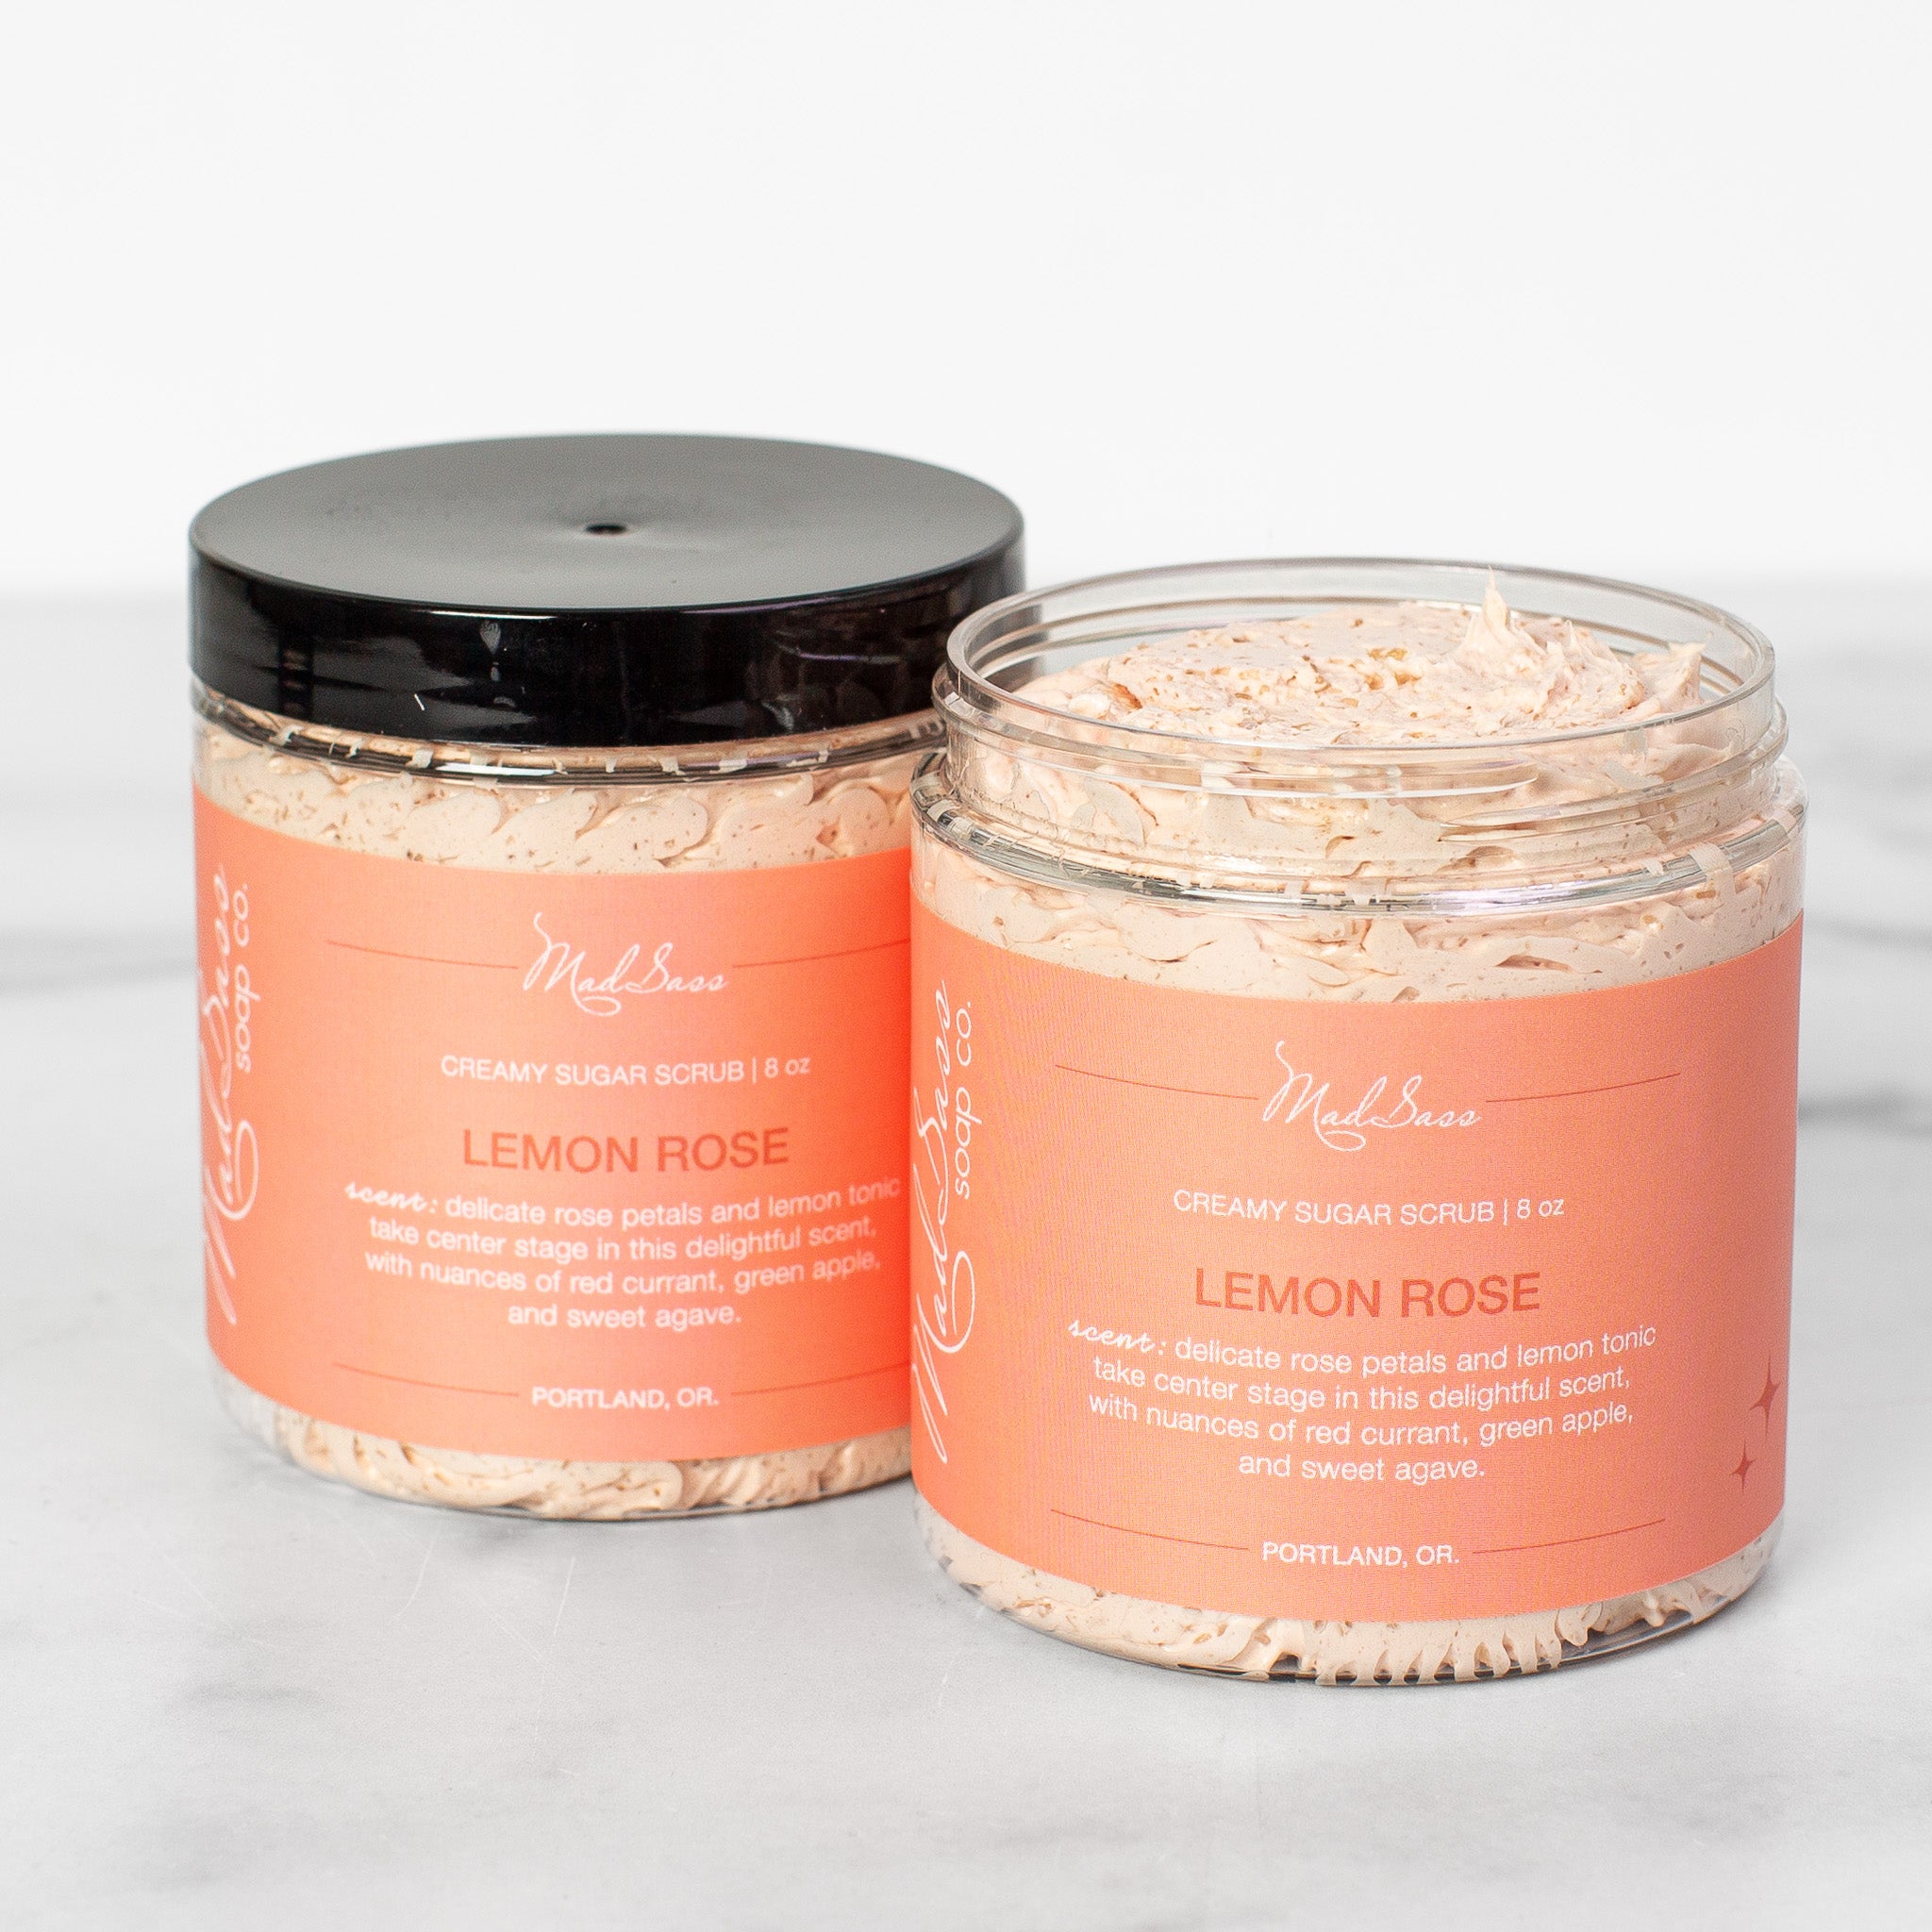 Two containers of Lemon Rose Creamy Sugar Scrubs on a white background. Lemon Rose is a light pink scrub in a clear tub with a black lid.